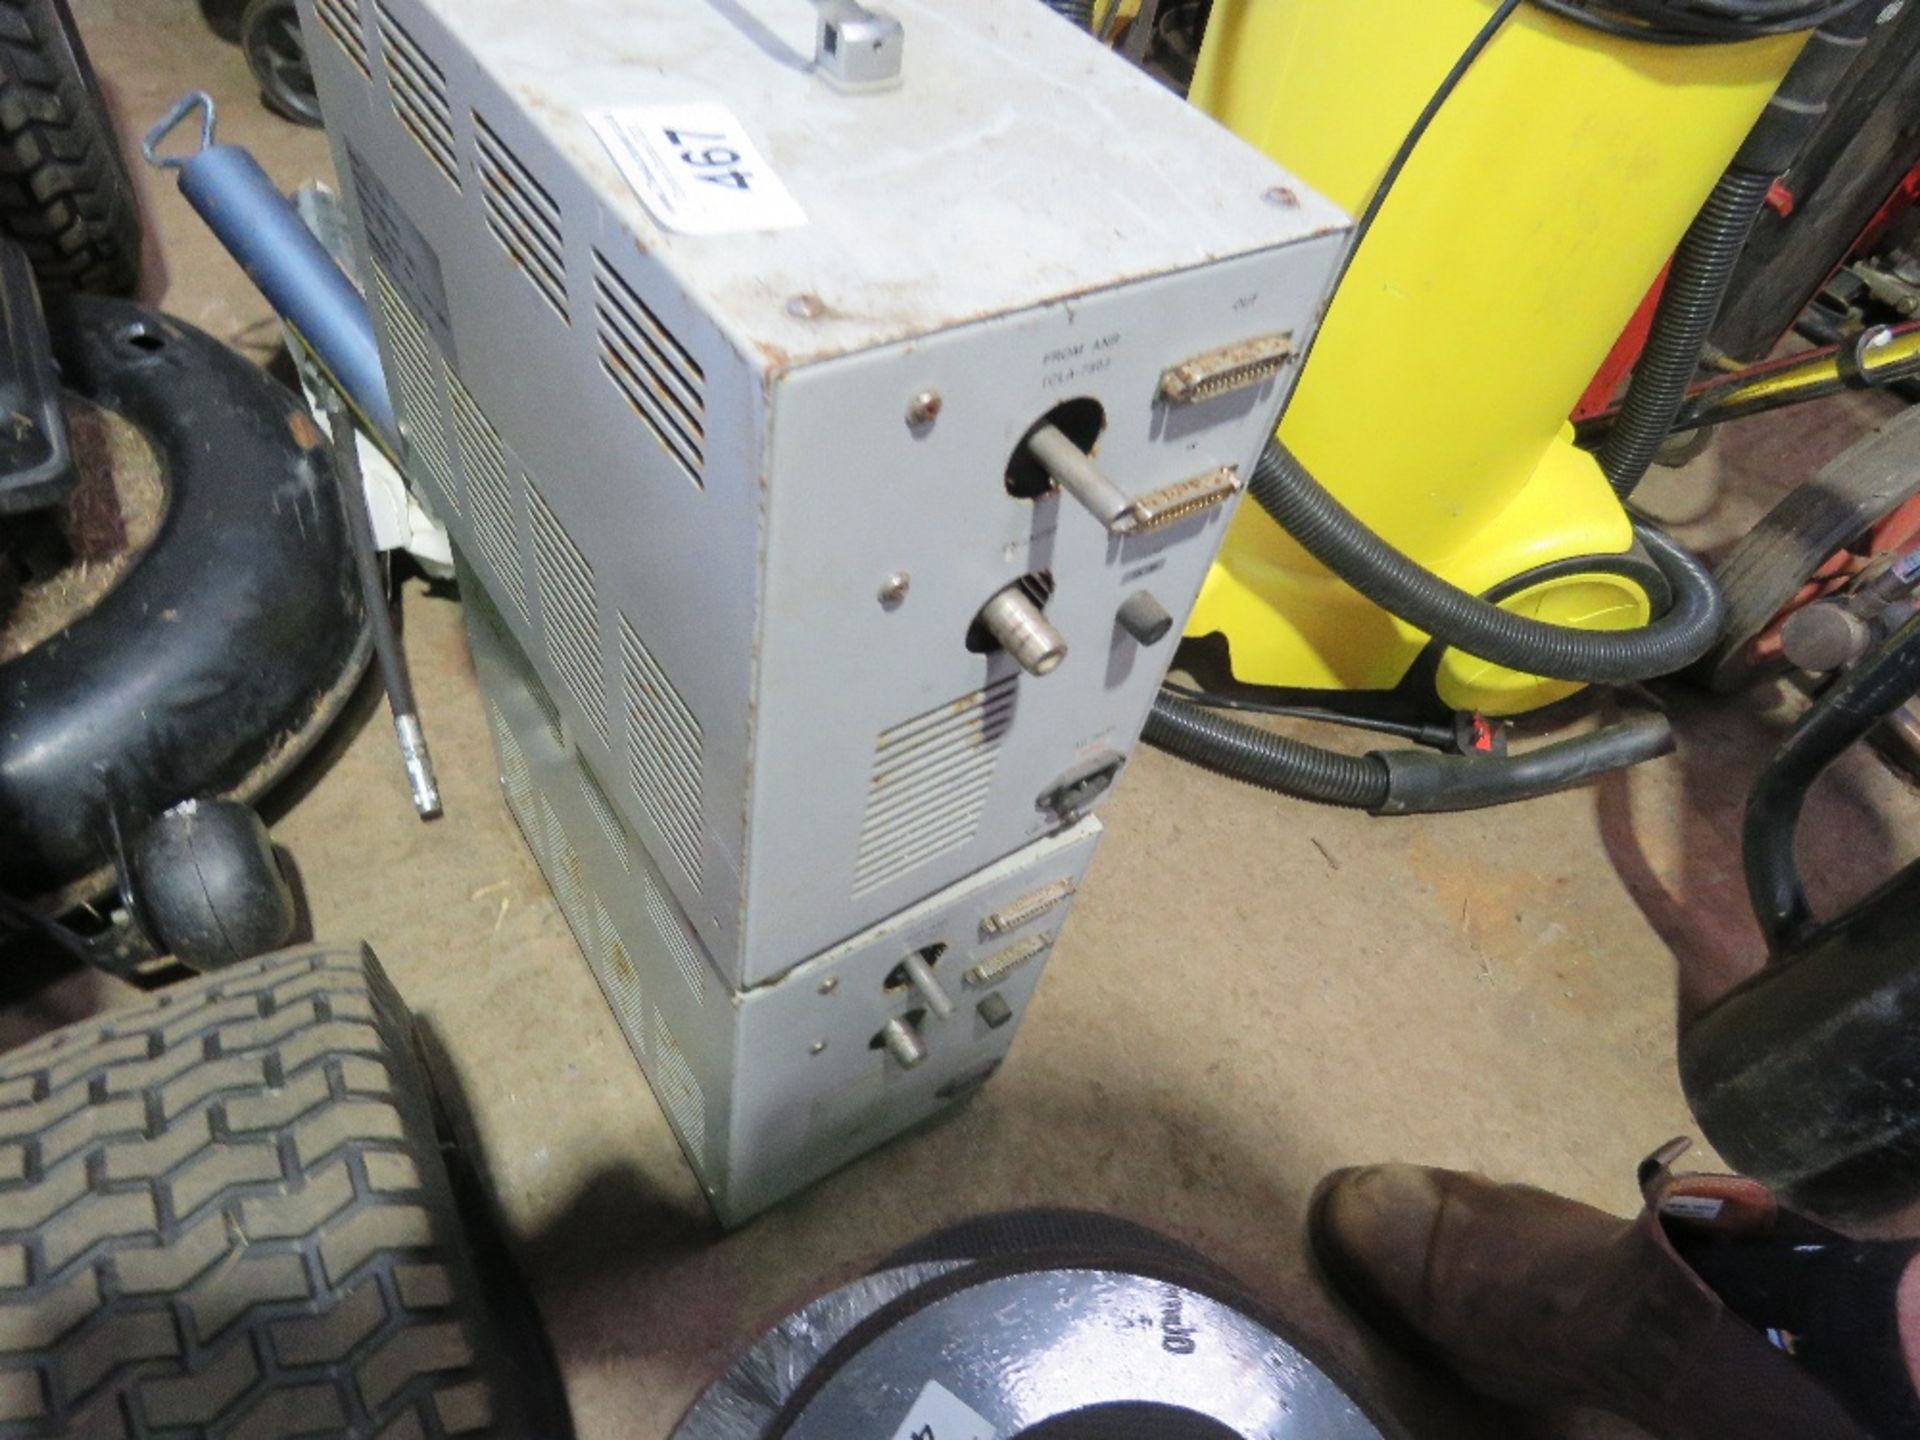 2 X HURISH VACUUM PUMP UNIT SOURCED FROM SITE CLOSURE/CLEARANCE. - Image 2 of 4